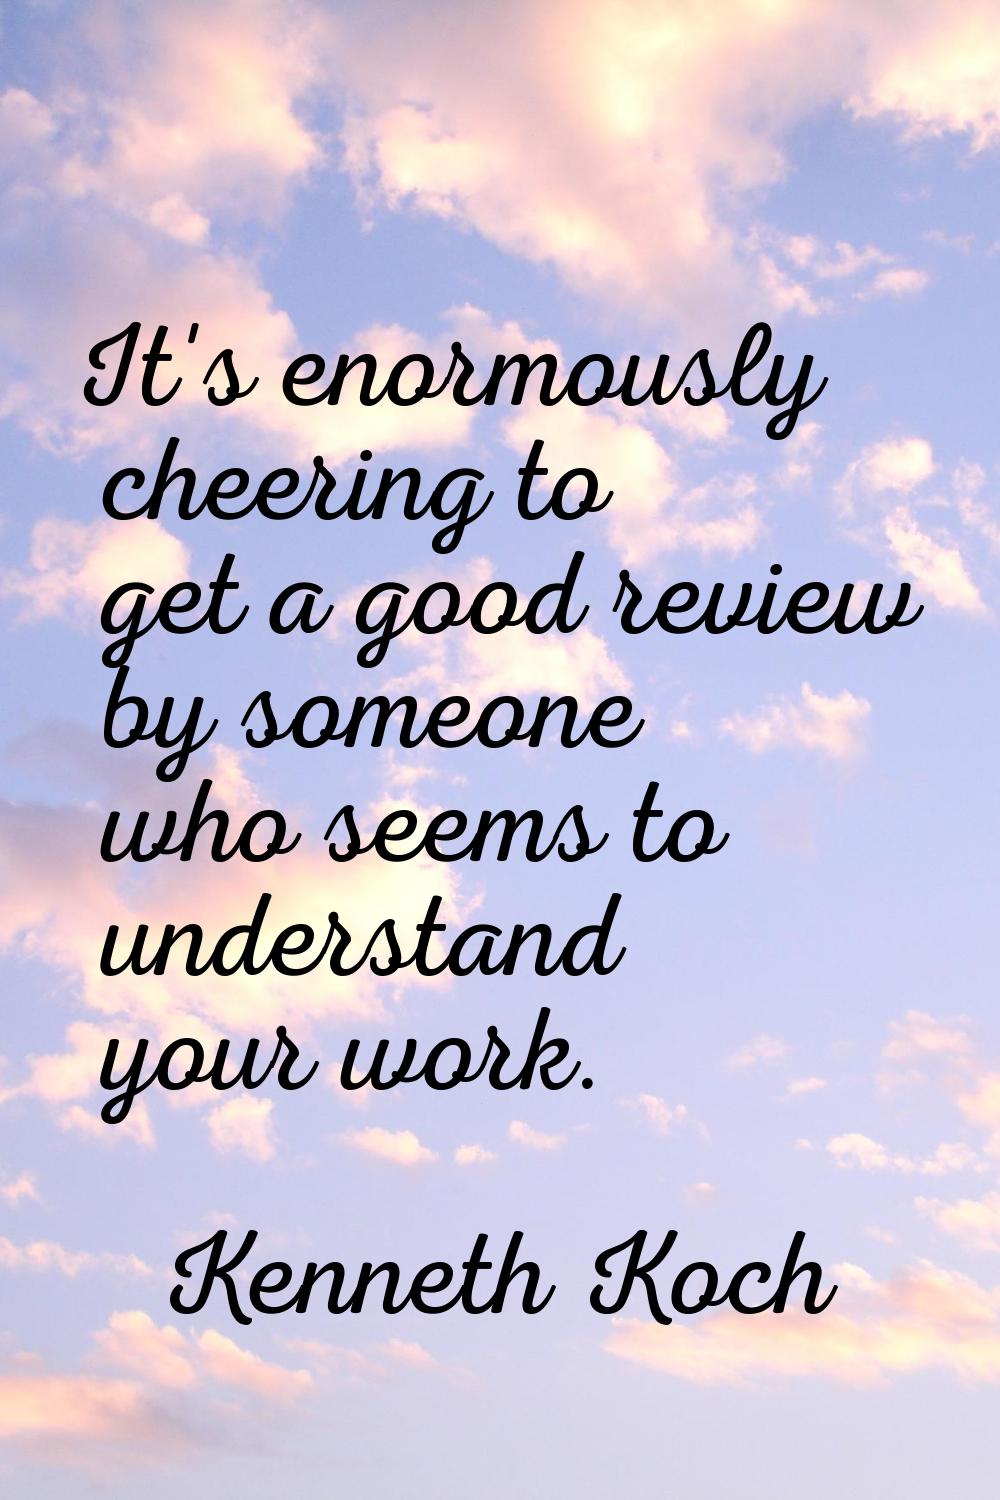 It's enormously cheering to get a good review by someone who seems to understand your work.